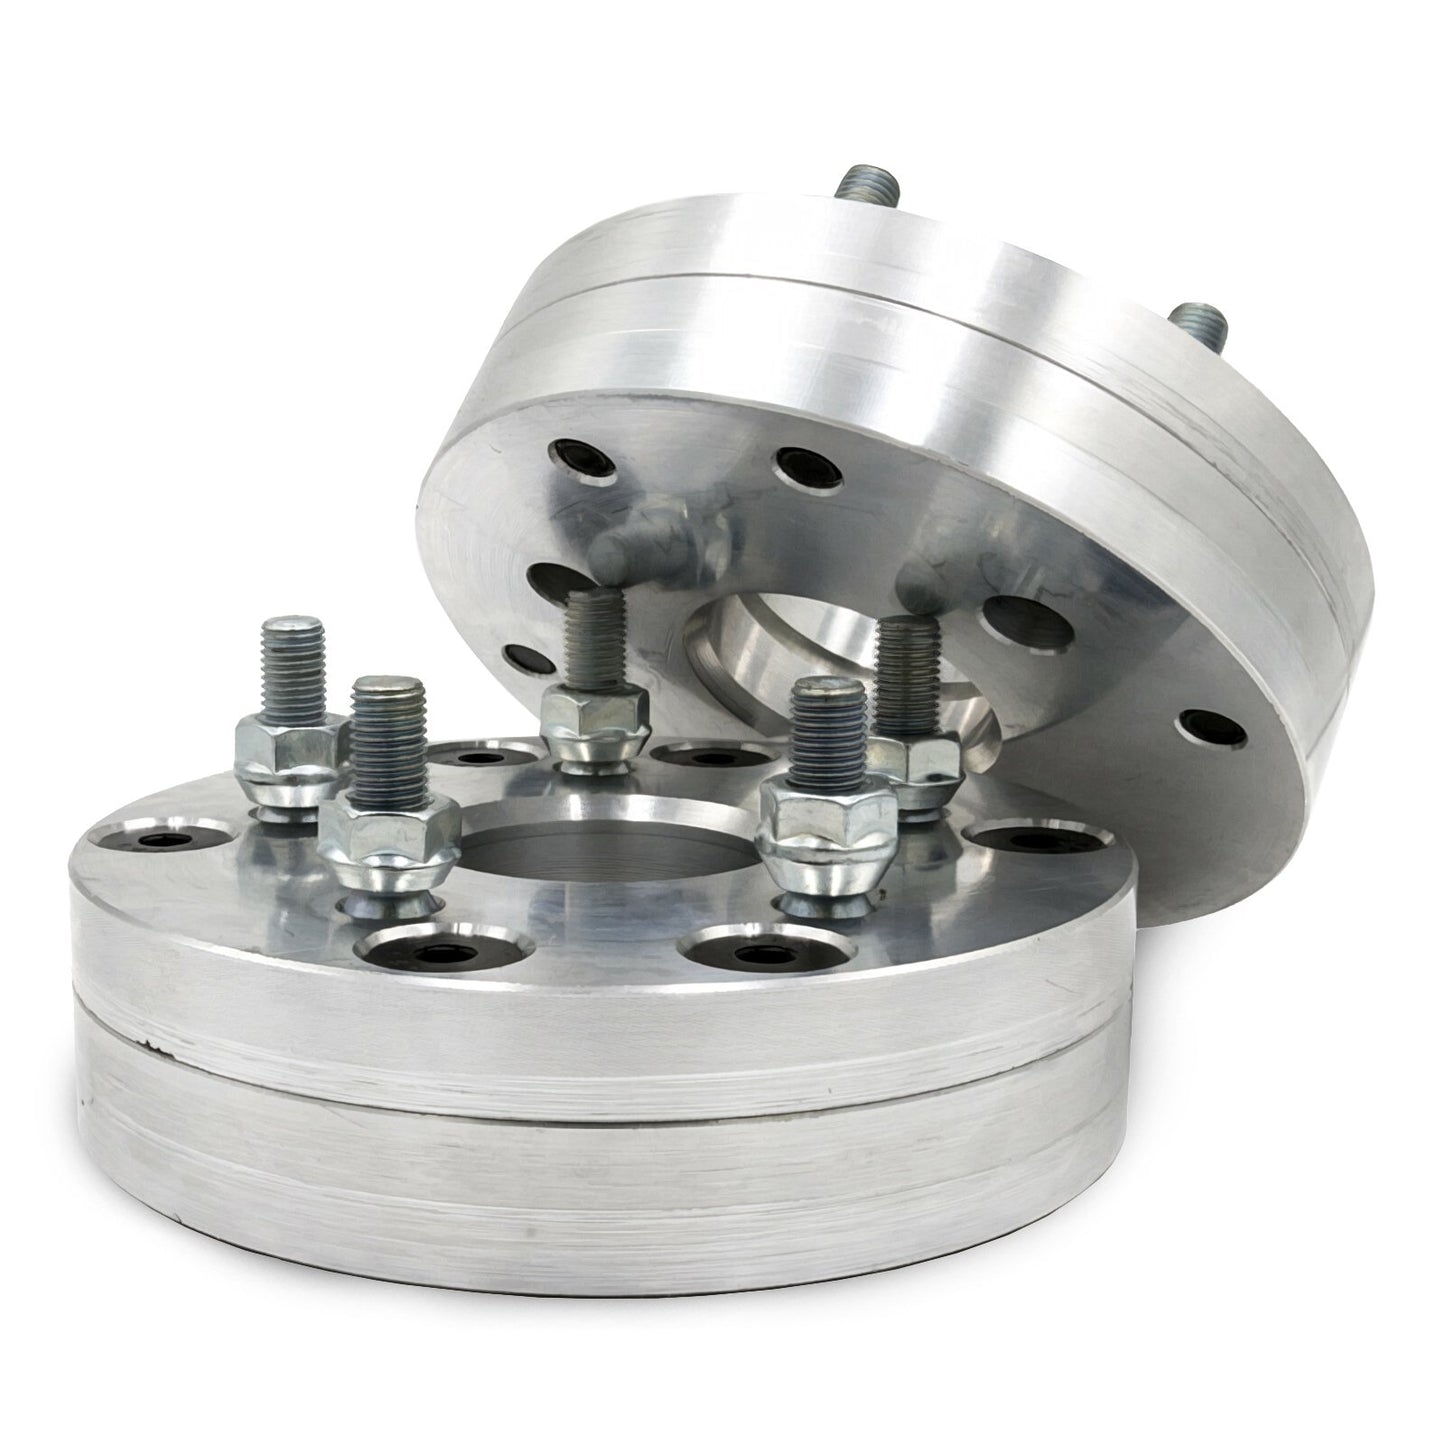 4x130 to 5x130 2 piece Wheel Adapter - Thickness: 1.5" - 3"